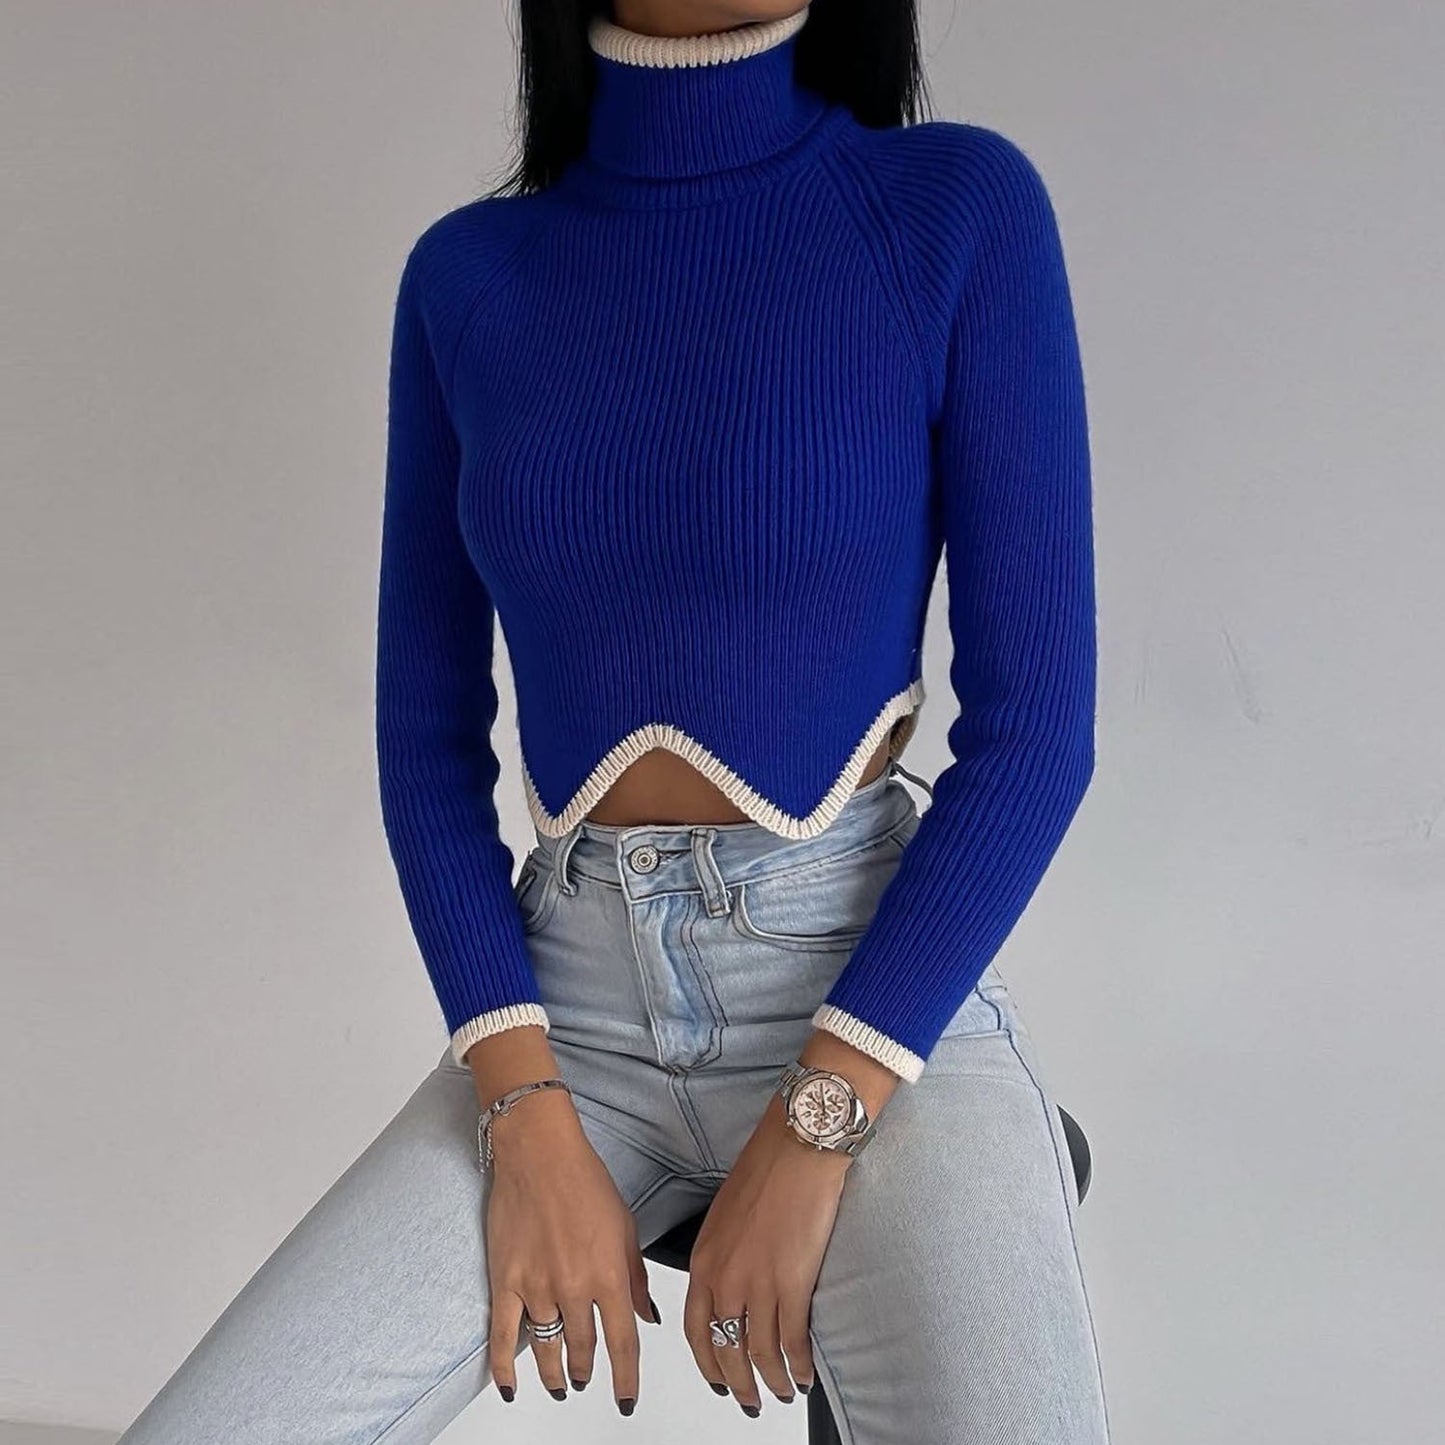 High Neck Short Sweater: A stylish sweater with a high neckline and a shorter length, offering a fashionable and comfortable look.